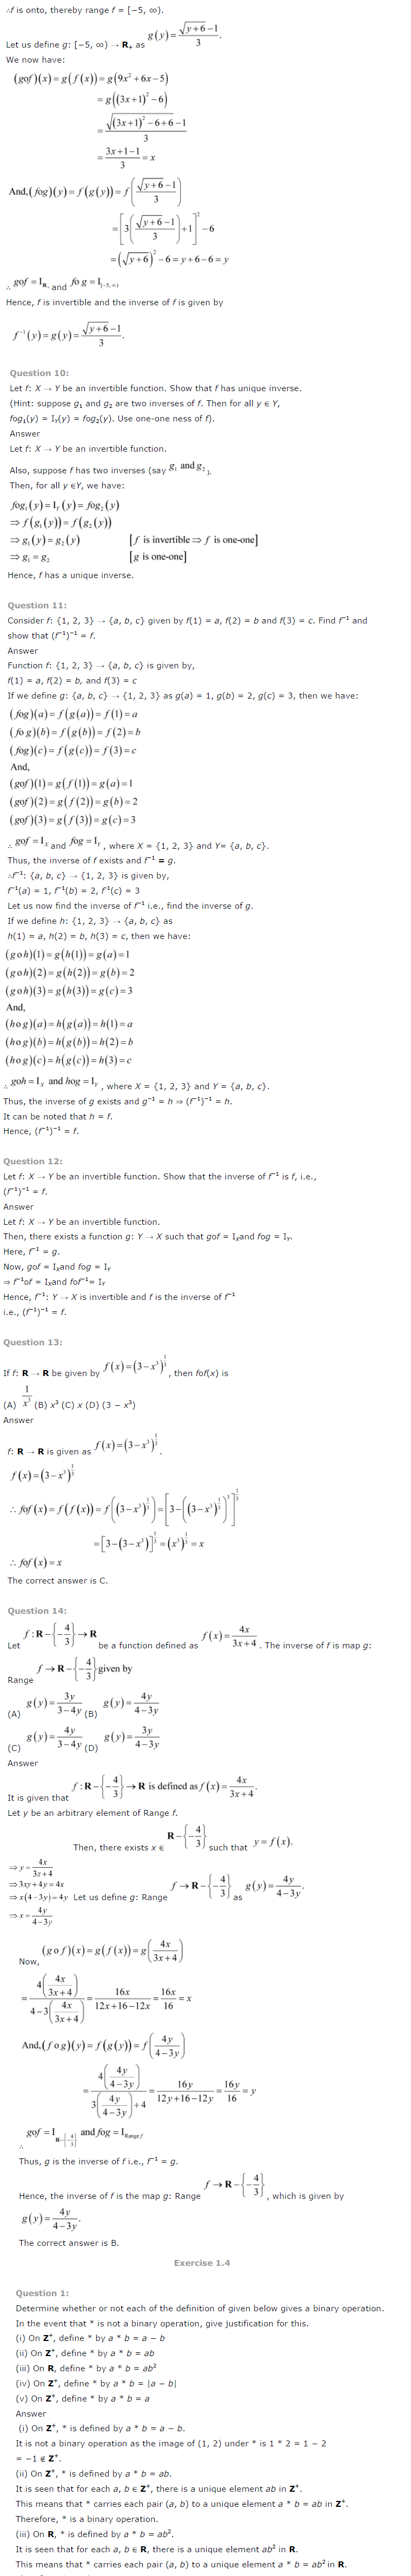 NCERT Solutions For Class 12 Maths Chapter 1 Relations and Functions 7